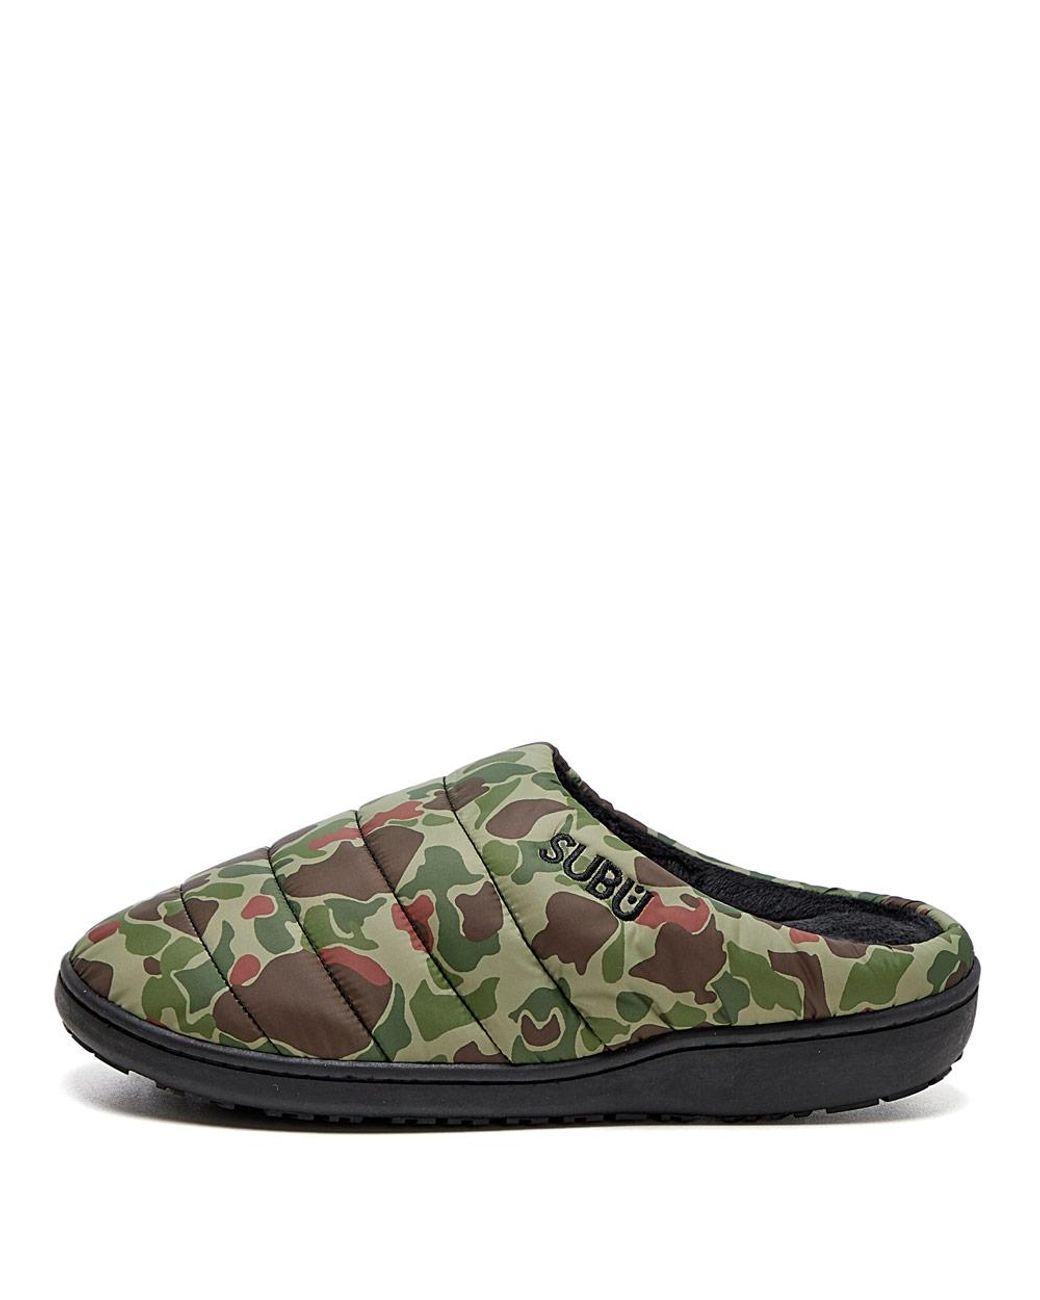 SUBU Synthetic Ssense Exclusive Quilted Camo Slippers in Black for Men Mens Shoes Slip-on shoes Slippers 